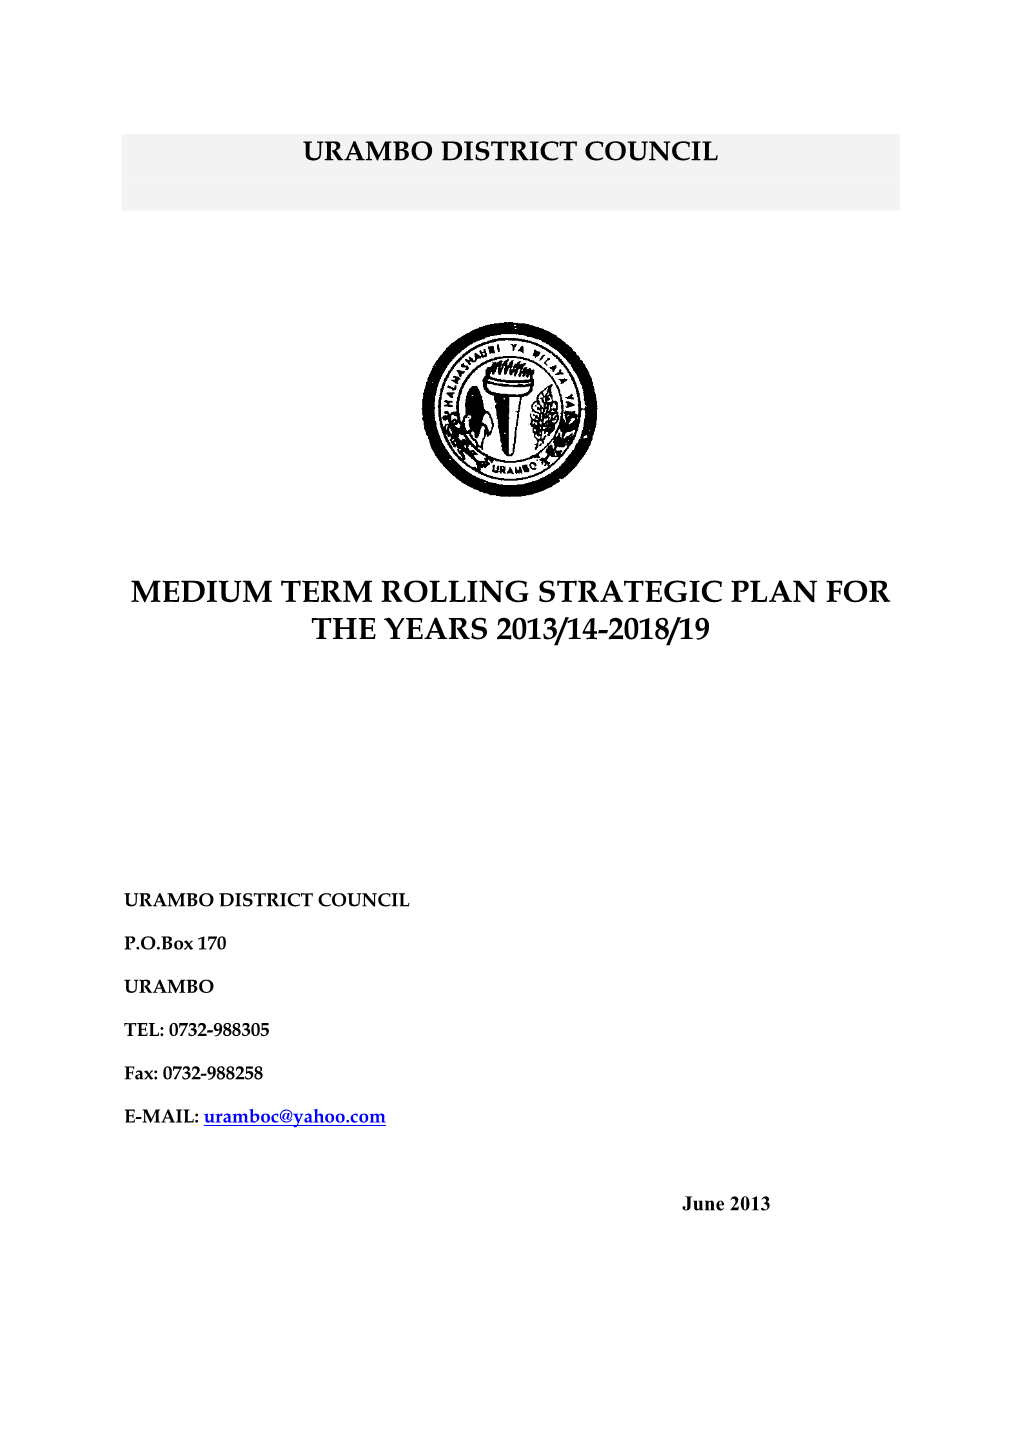 Medium Term Rolling Strategic Plan for the Years 2013/14-2018/19